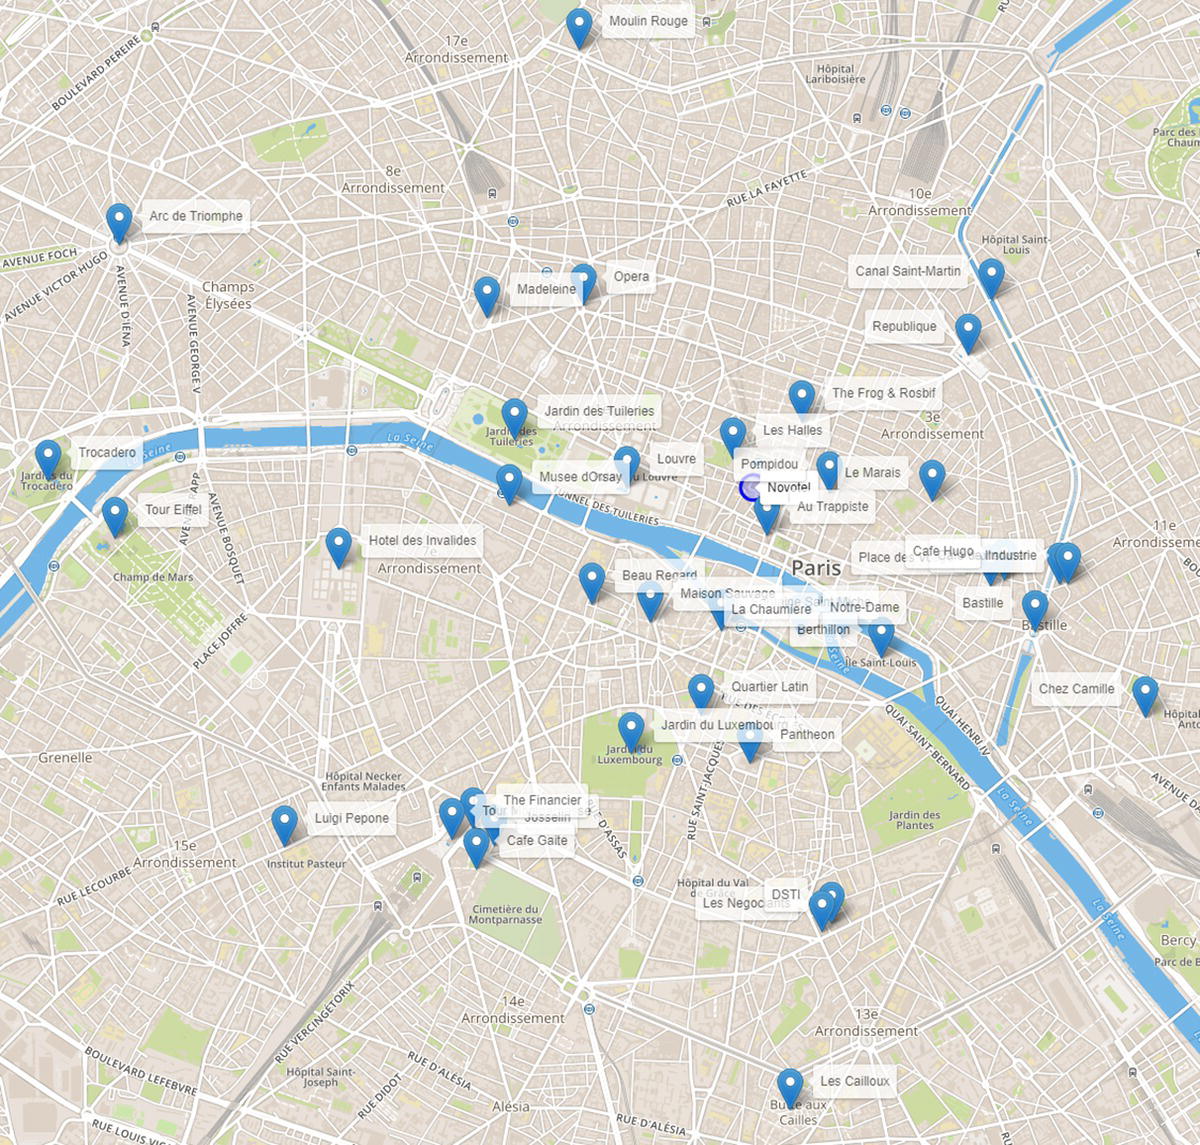 Schematic illustration of places to be visited in the optimal tour in Paris.